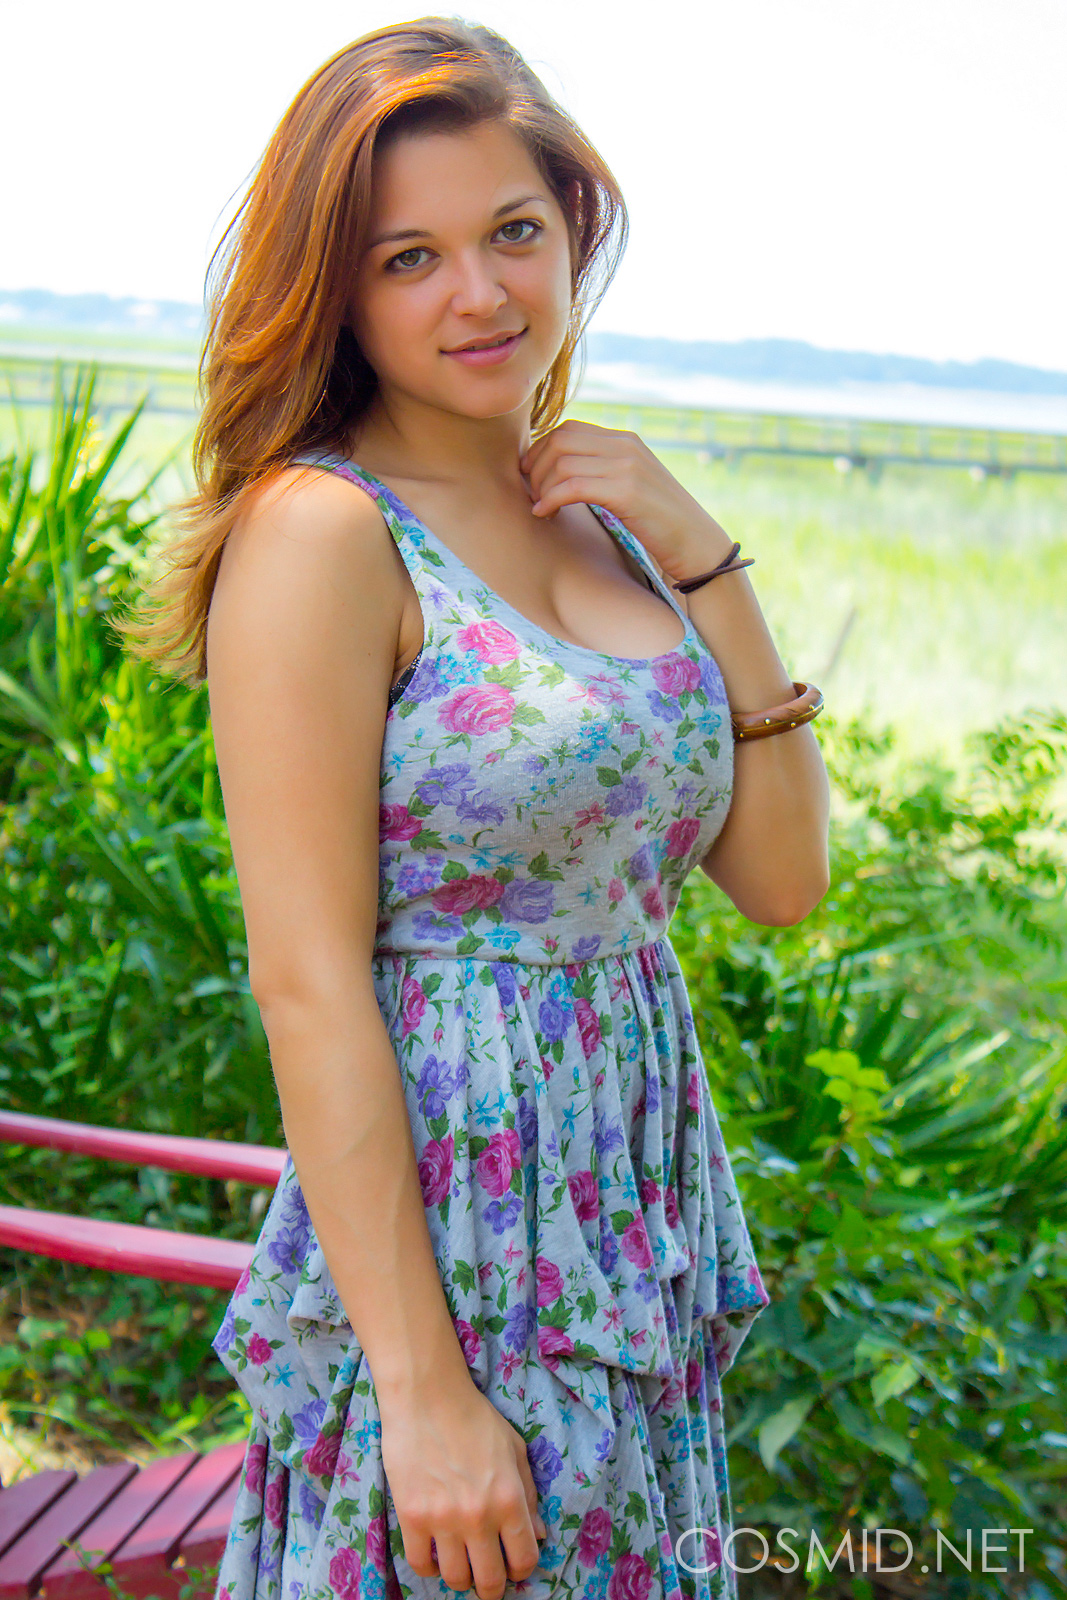 Pictures Of Tessa Fowler